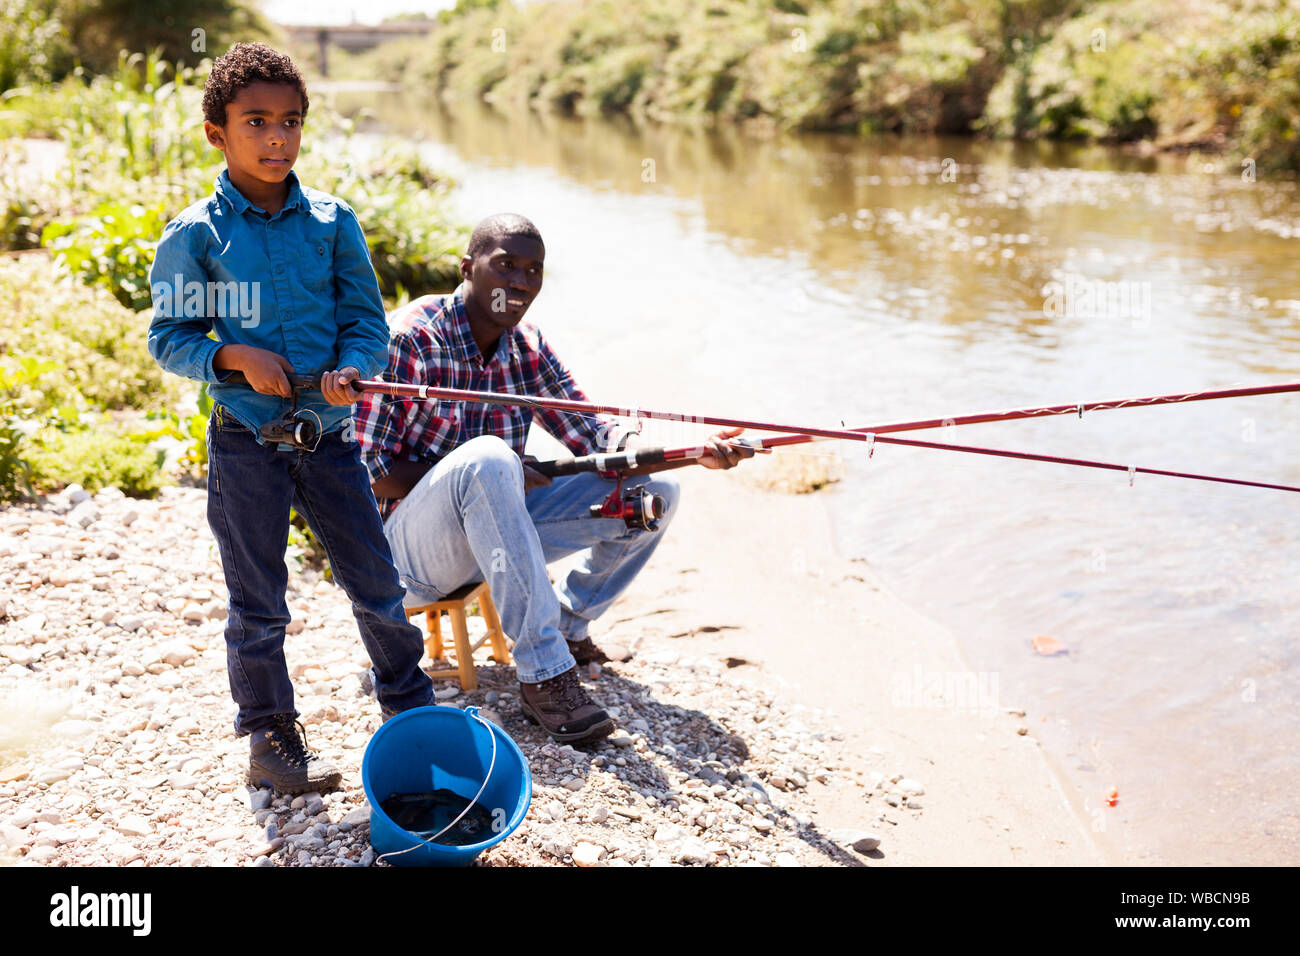 https://c8.alamy.com/comp/WBCN9B/positive-african-man-and-little-boy-standing-near-river-and-fishing-with-rods-WBCN9B.jpg